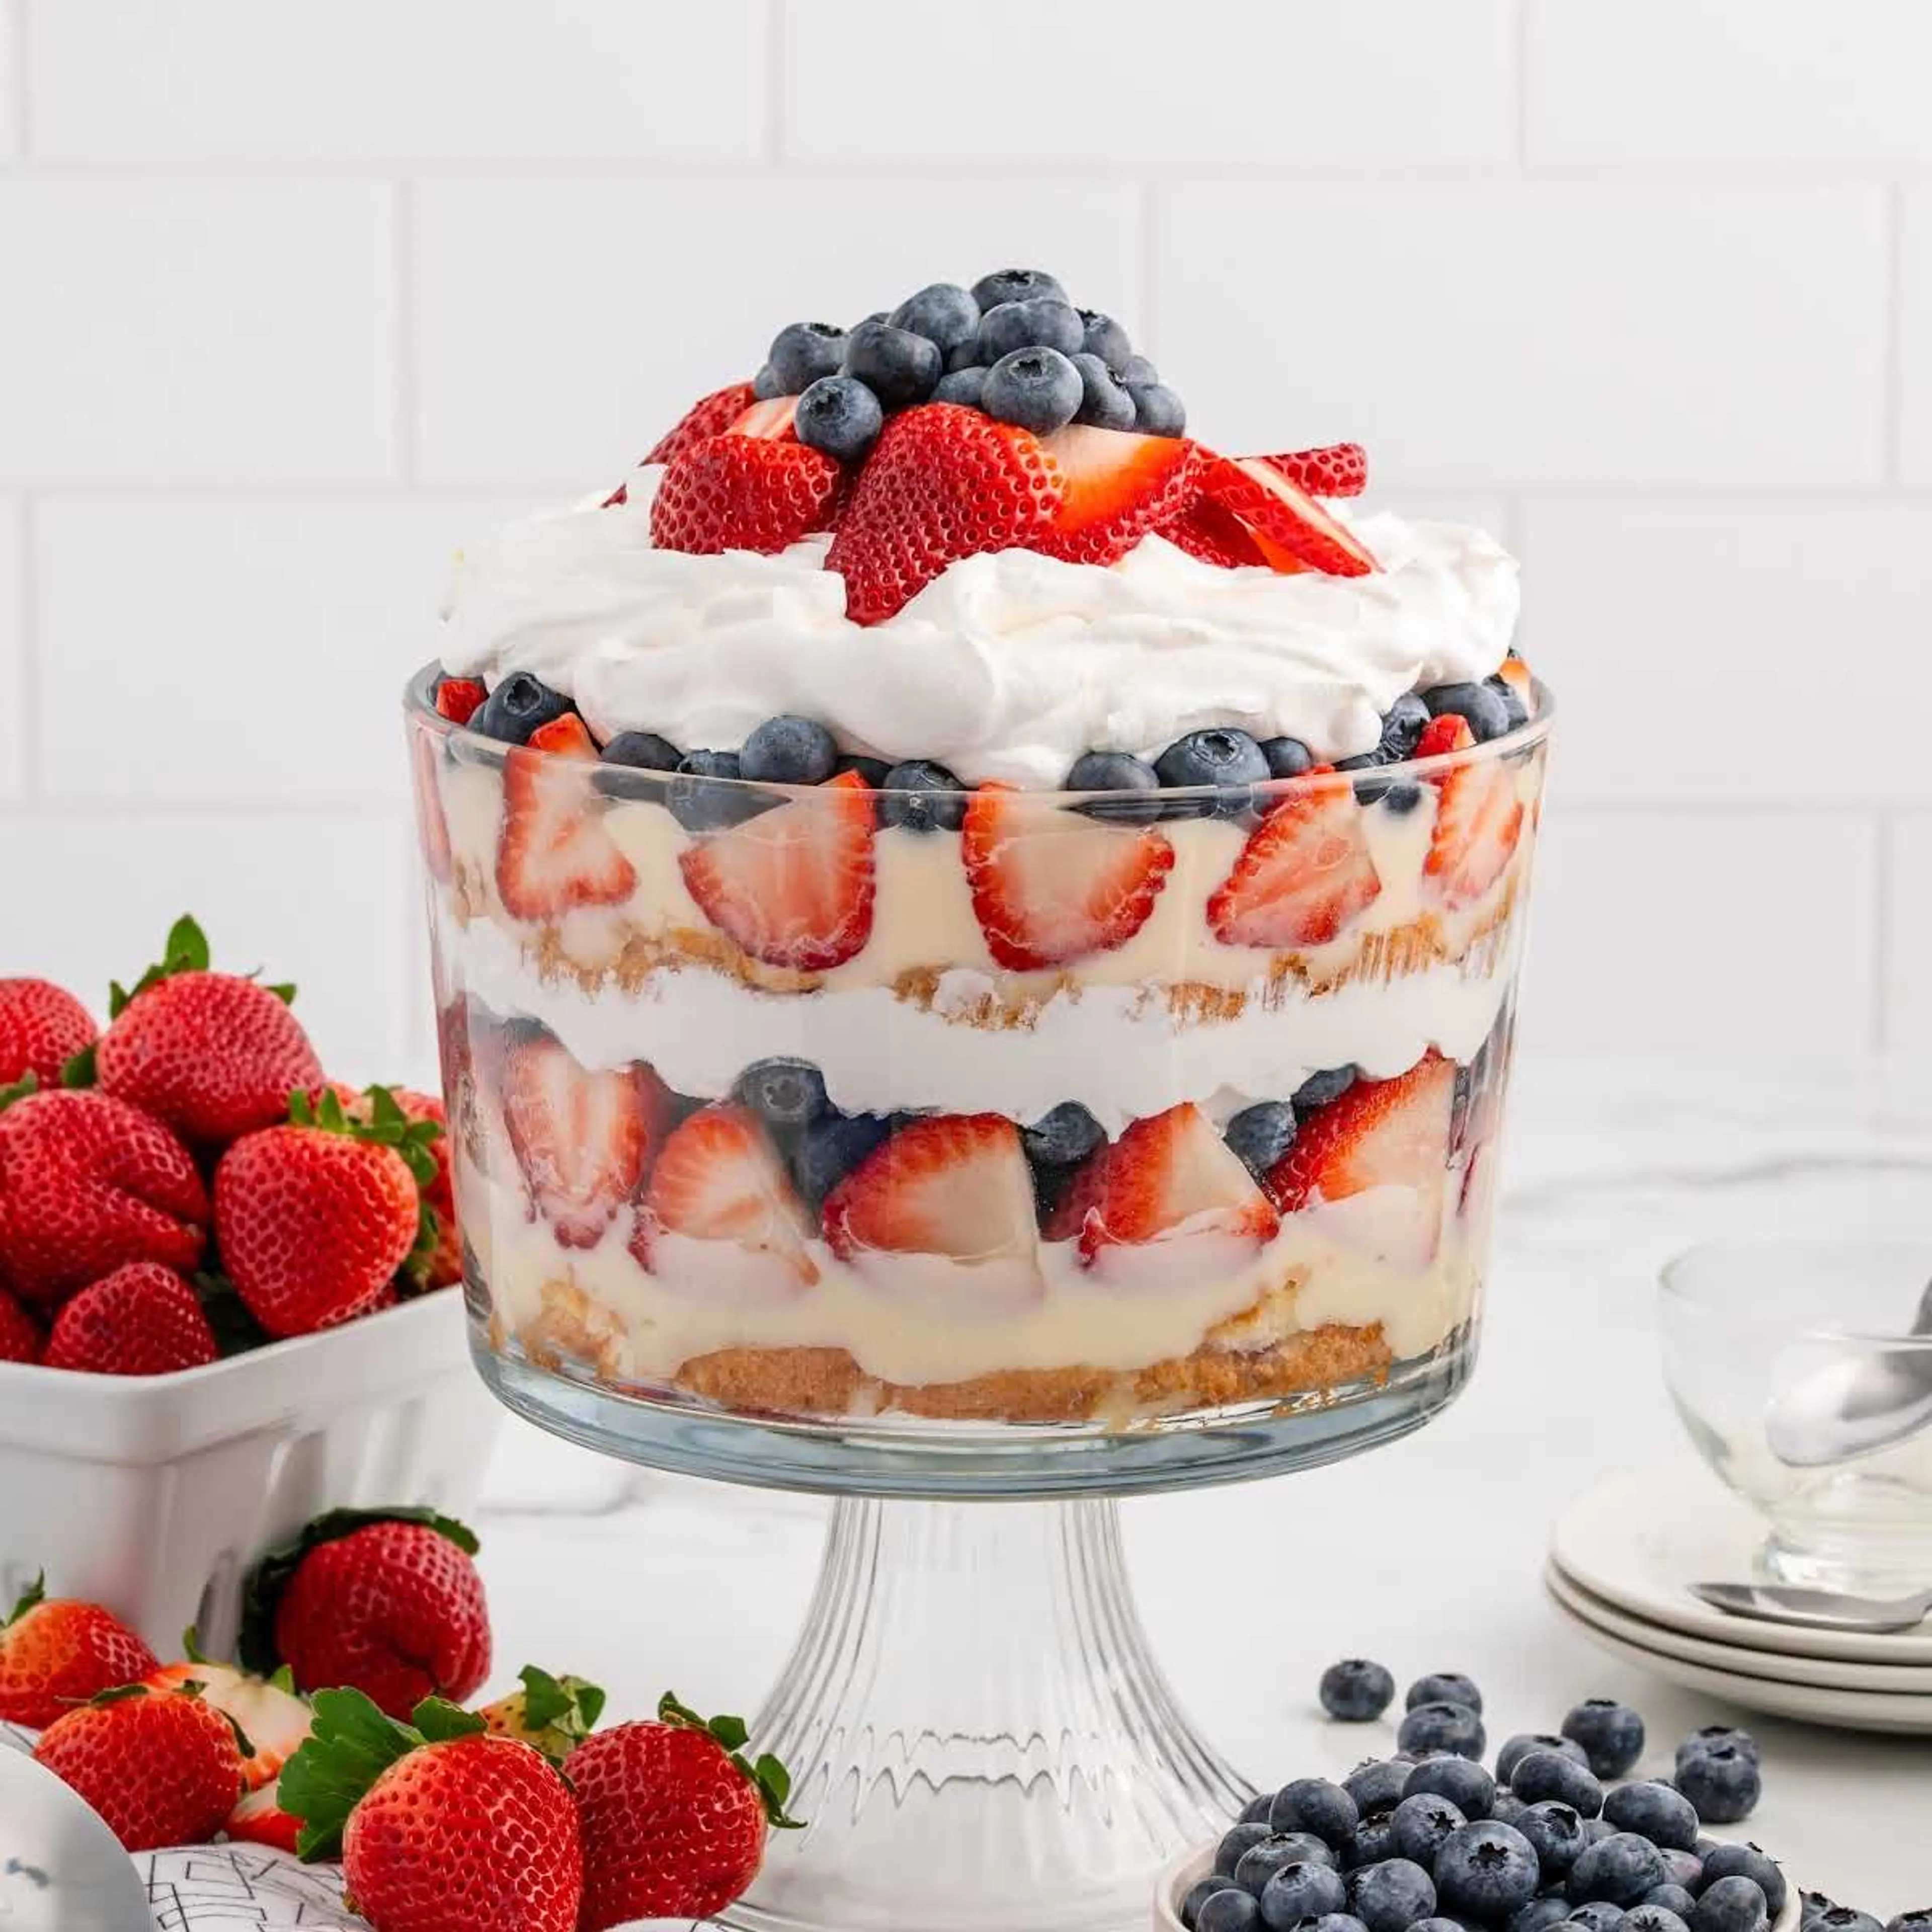 4th of July Trifle